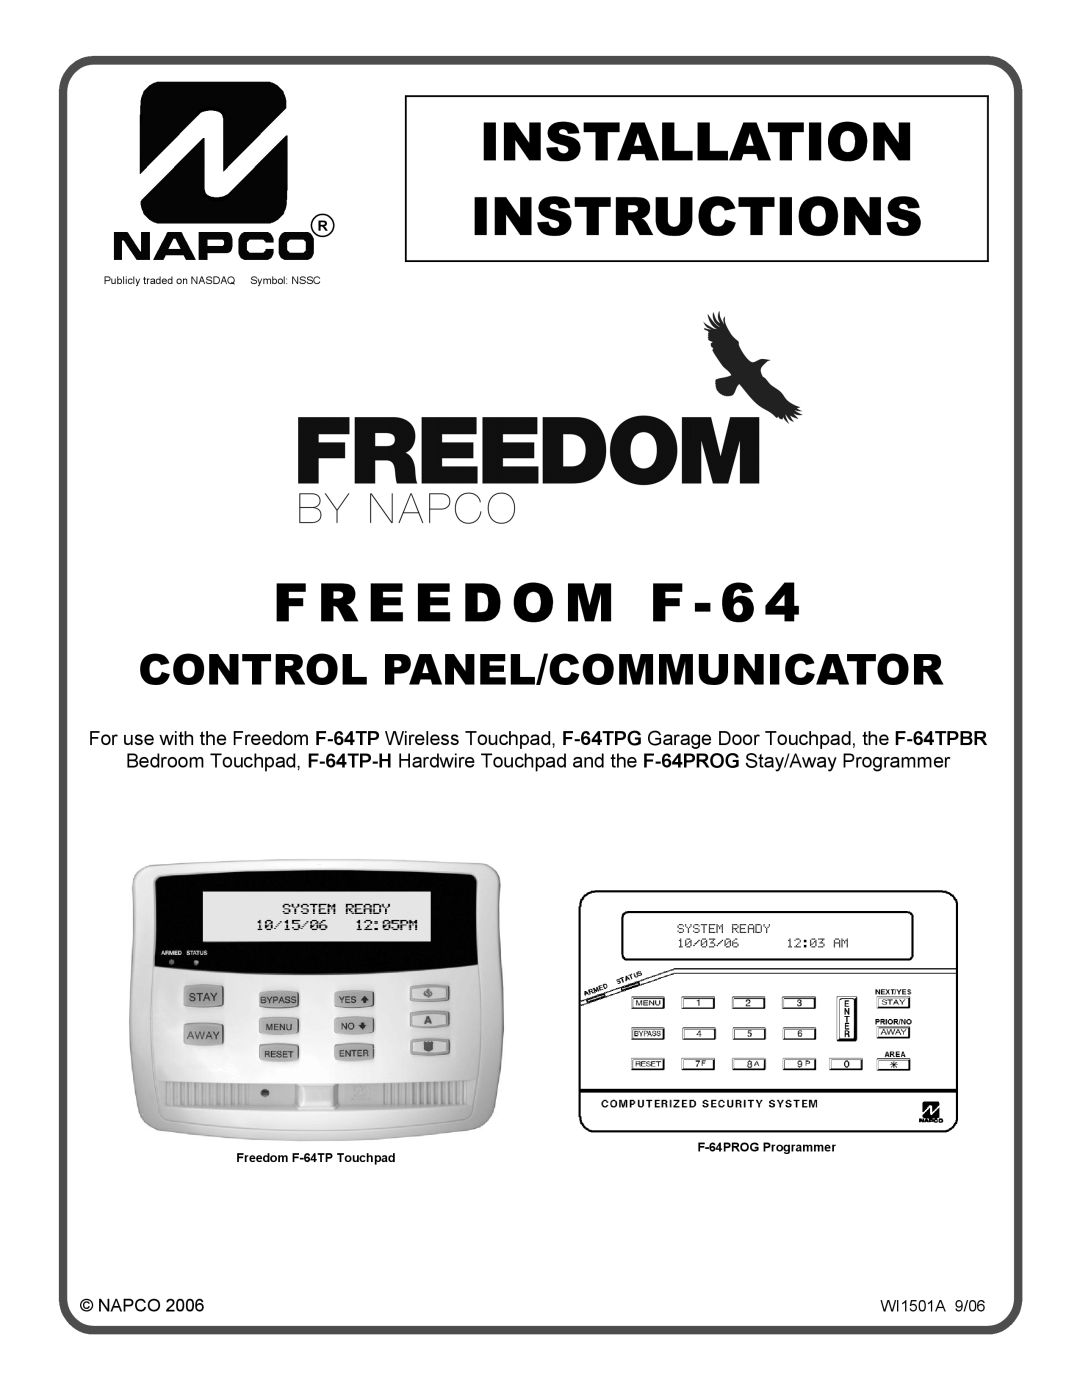 Napco Security Technologies WI1501A installation instructions Installation Instructions, Freedom F 